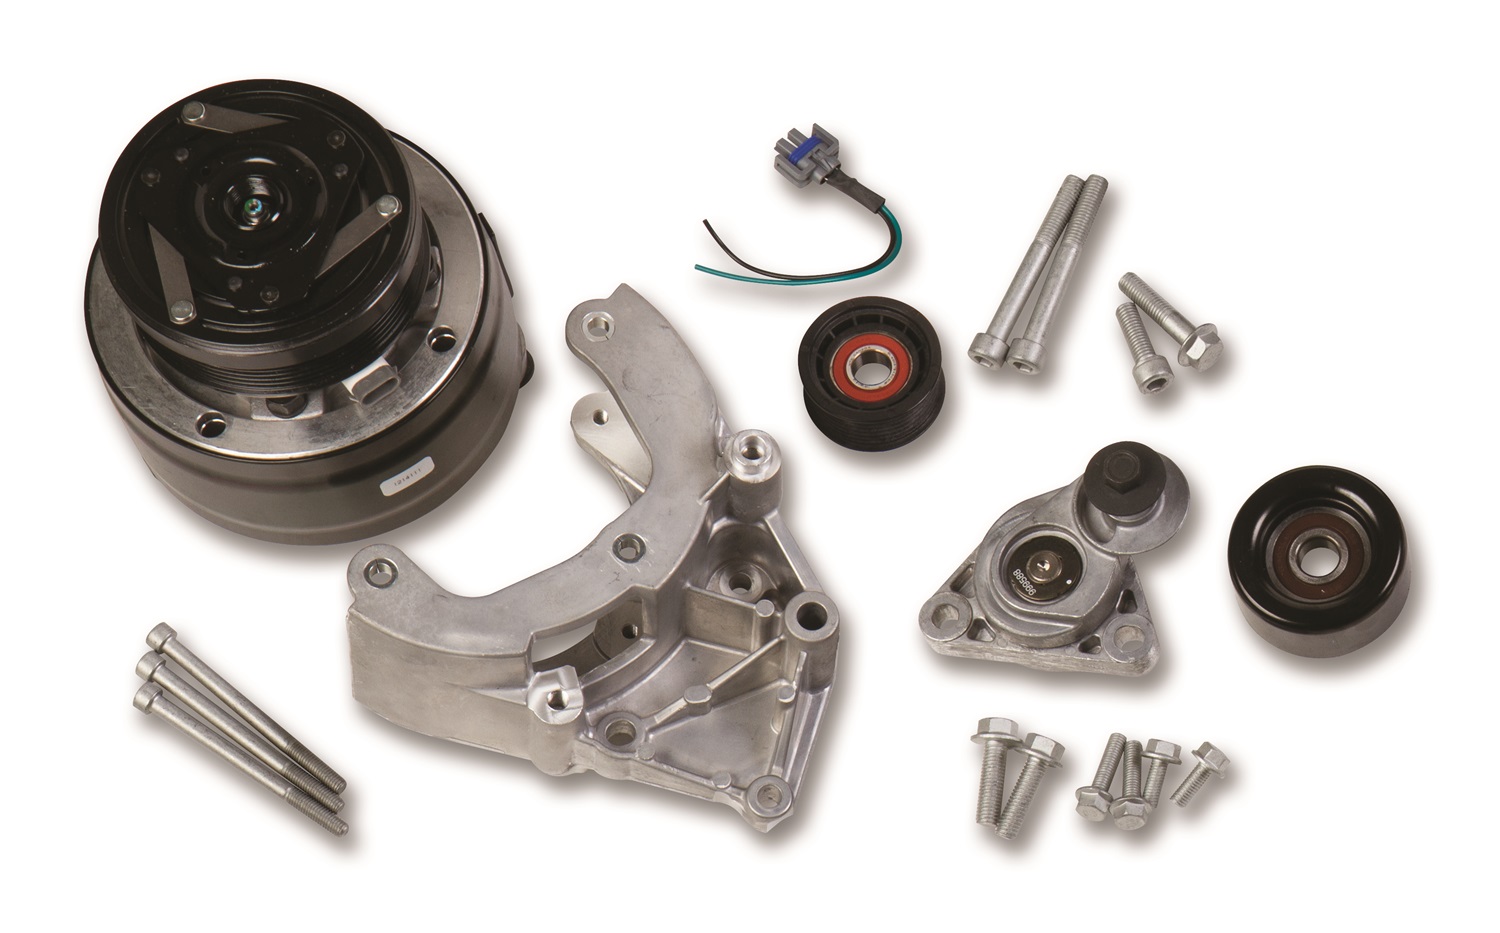 Holley Performance Holley Performance 20-140 Accessory Drive Bracket Kit